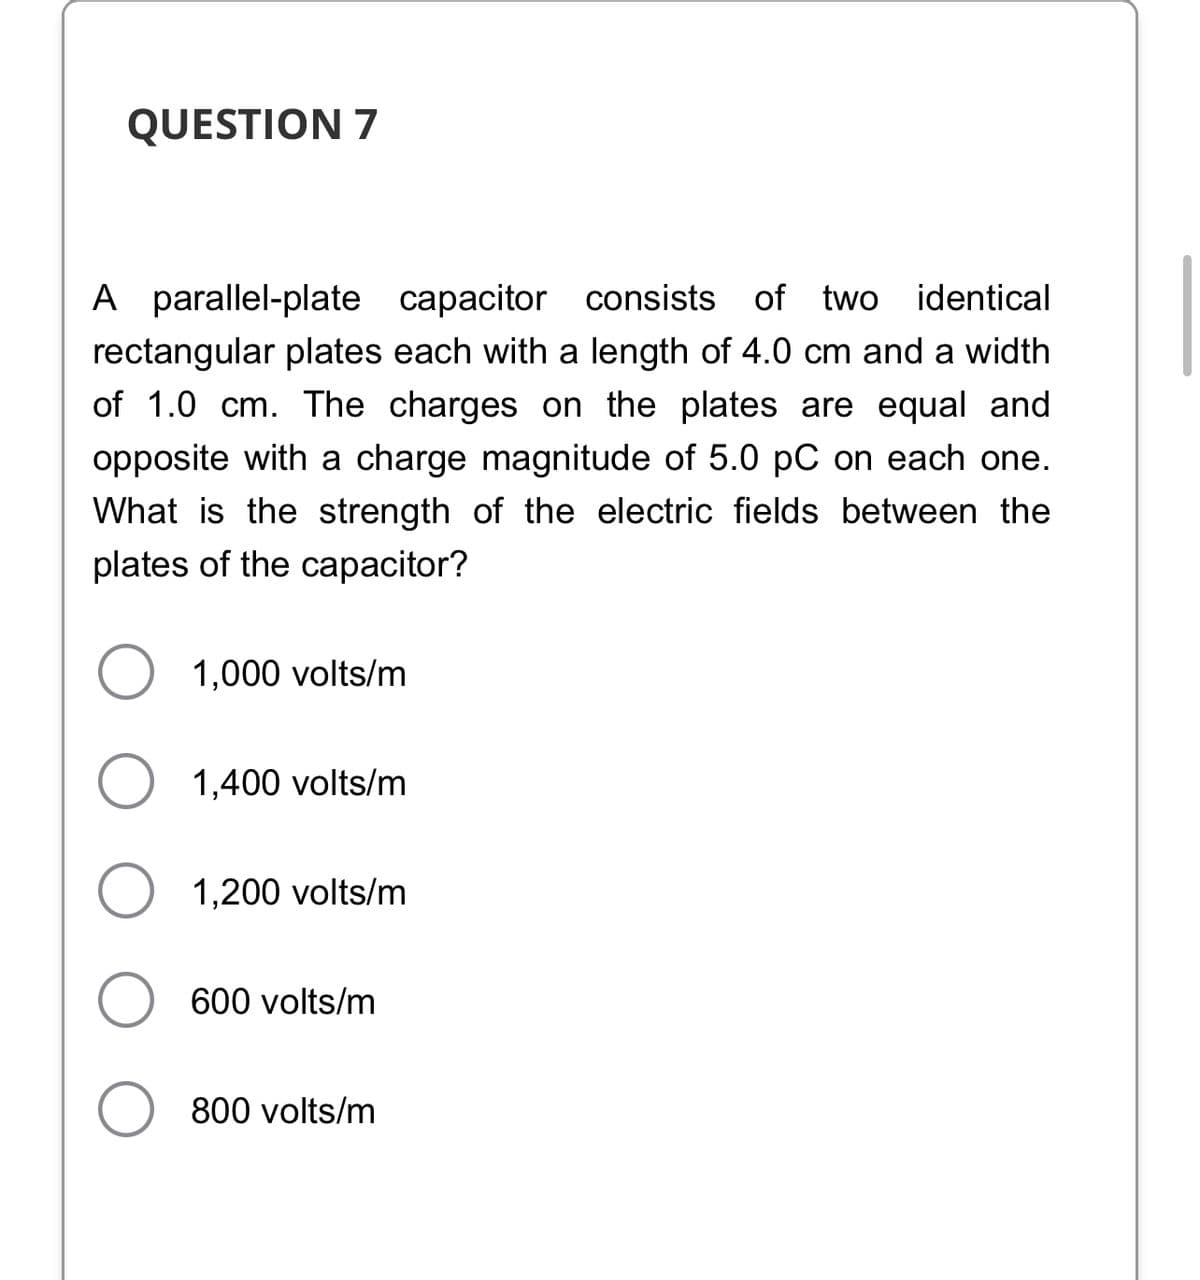 QUESTION 7
A parallel-plate capacitor consists of two
rectangular plates each with a length of 4.0 cm and a width
identical
of 1.0 cm. The charges on the plates are equal and
opposite with a charge magnitude of 5.0 pC on each one.
What is the strength of the electric fields between the
plates of the capacitor?
1,000 volts/m
1,400 volts/m
1,200 volts/m
600 volts/m
800 volts/m
